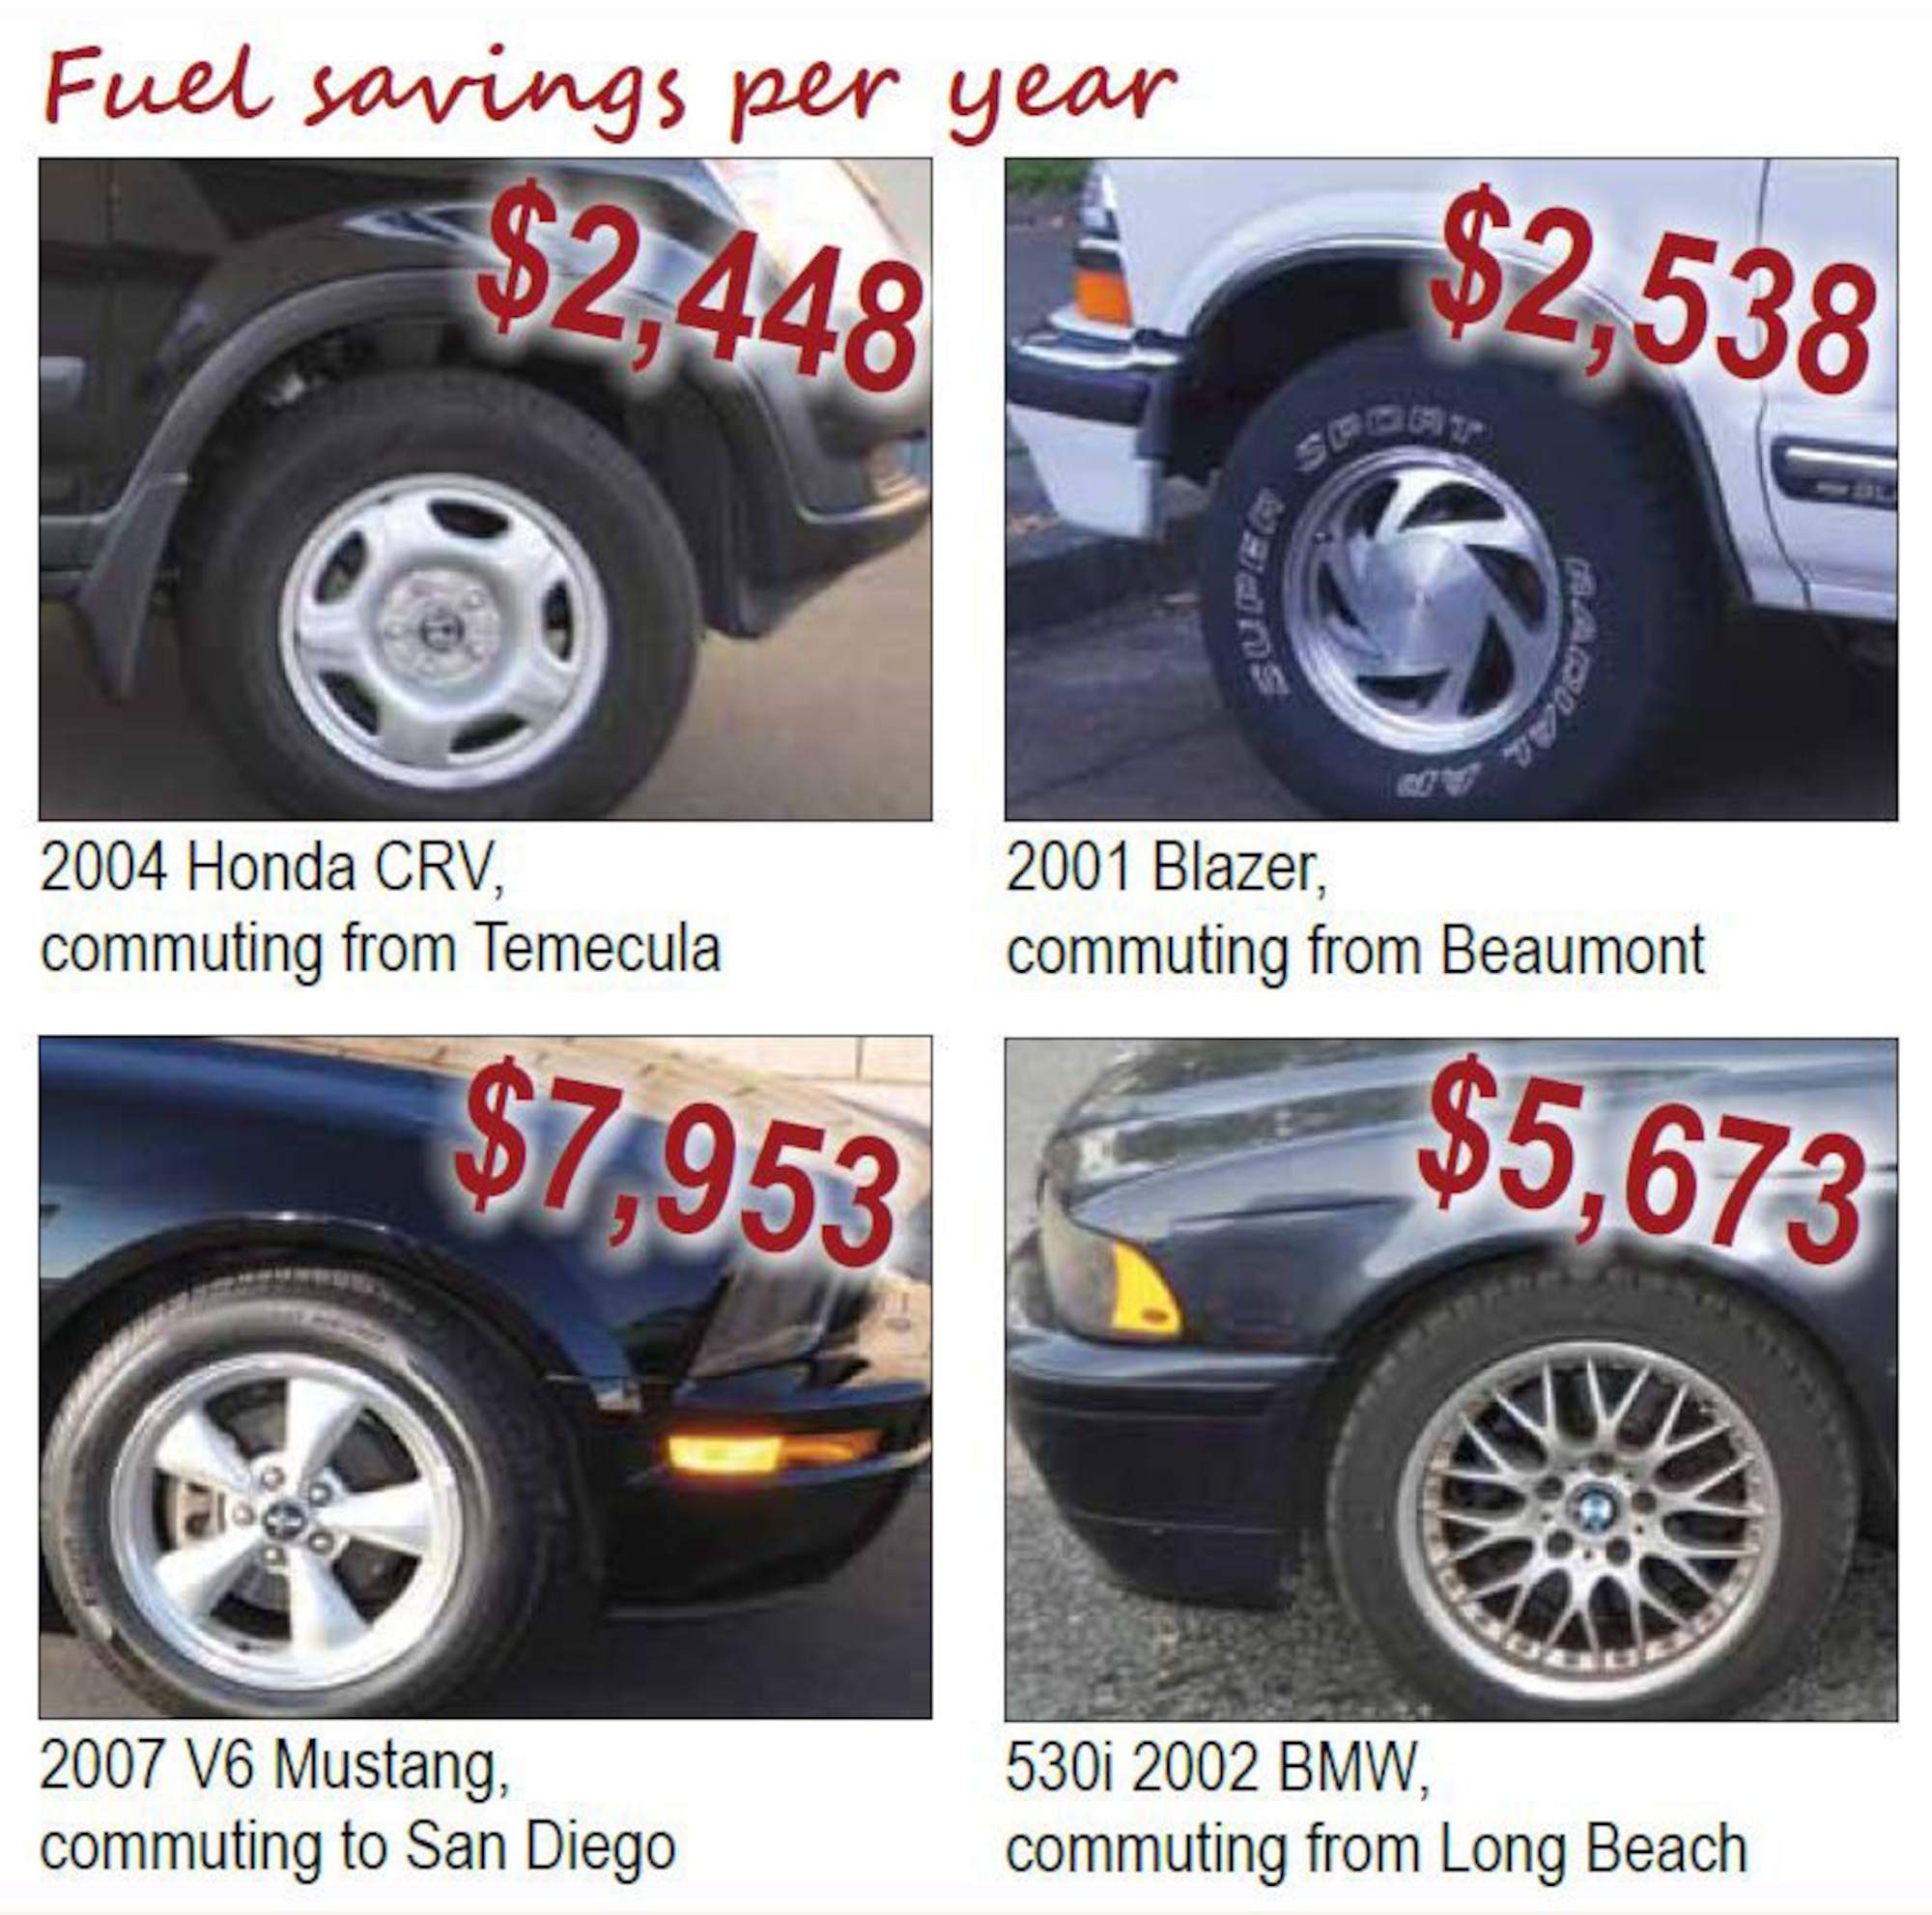 Airmen and civilian employees commute to March Air Reserve Base, Calif., from cities throughout Southern California.  In some cases, employees' drives exceed 90 miles each way.  March's rideshare program saves the government money, as well as individuals.  Here are examples of yearly commuter fuel savings using March employee vehicles.